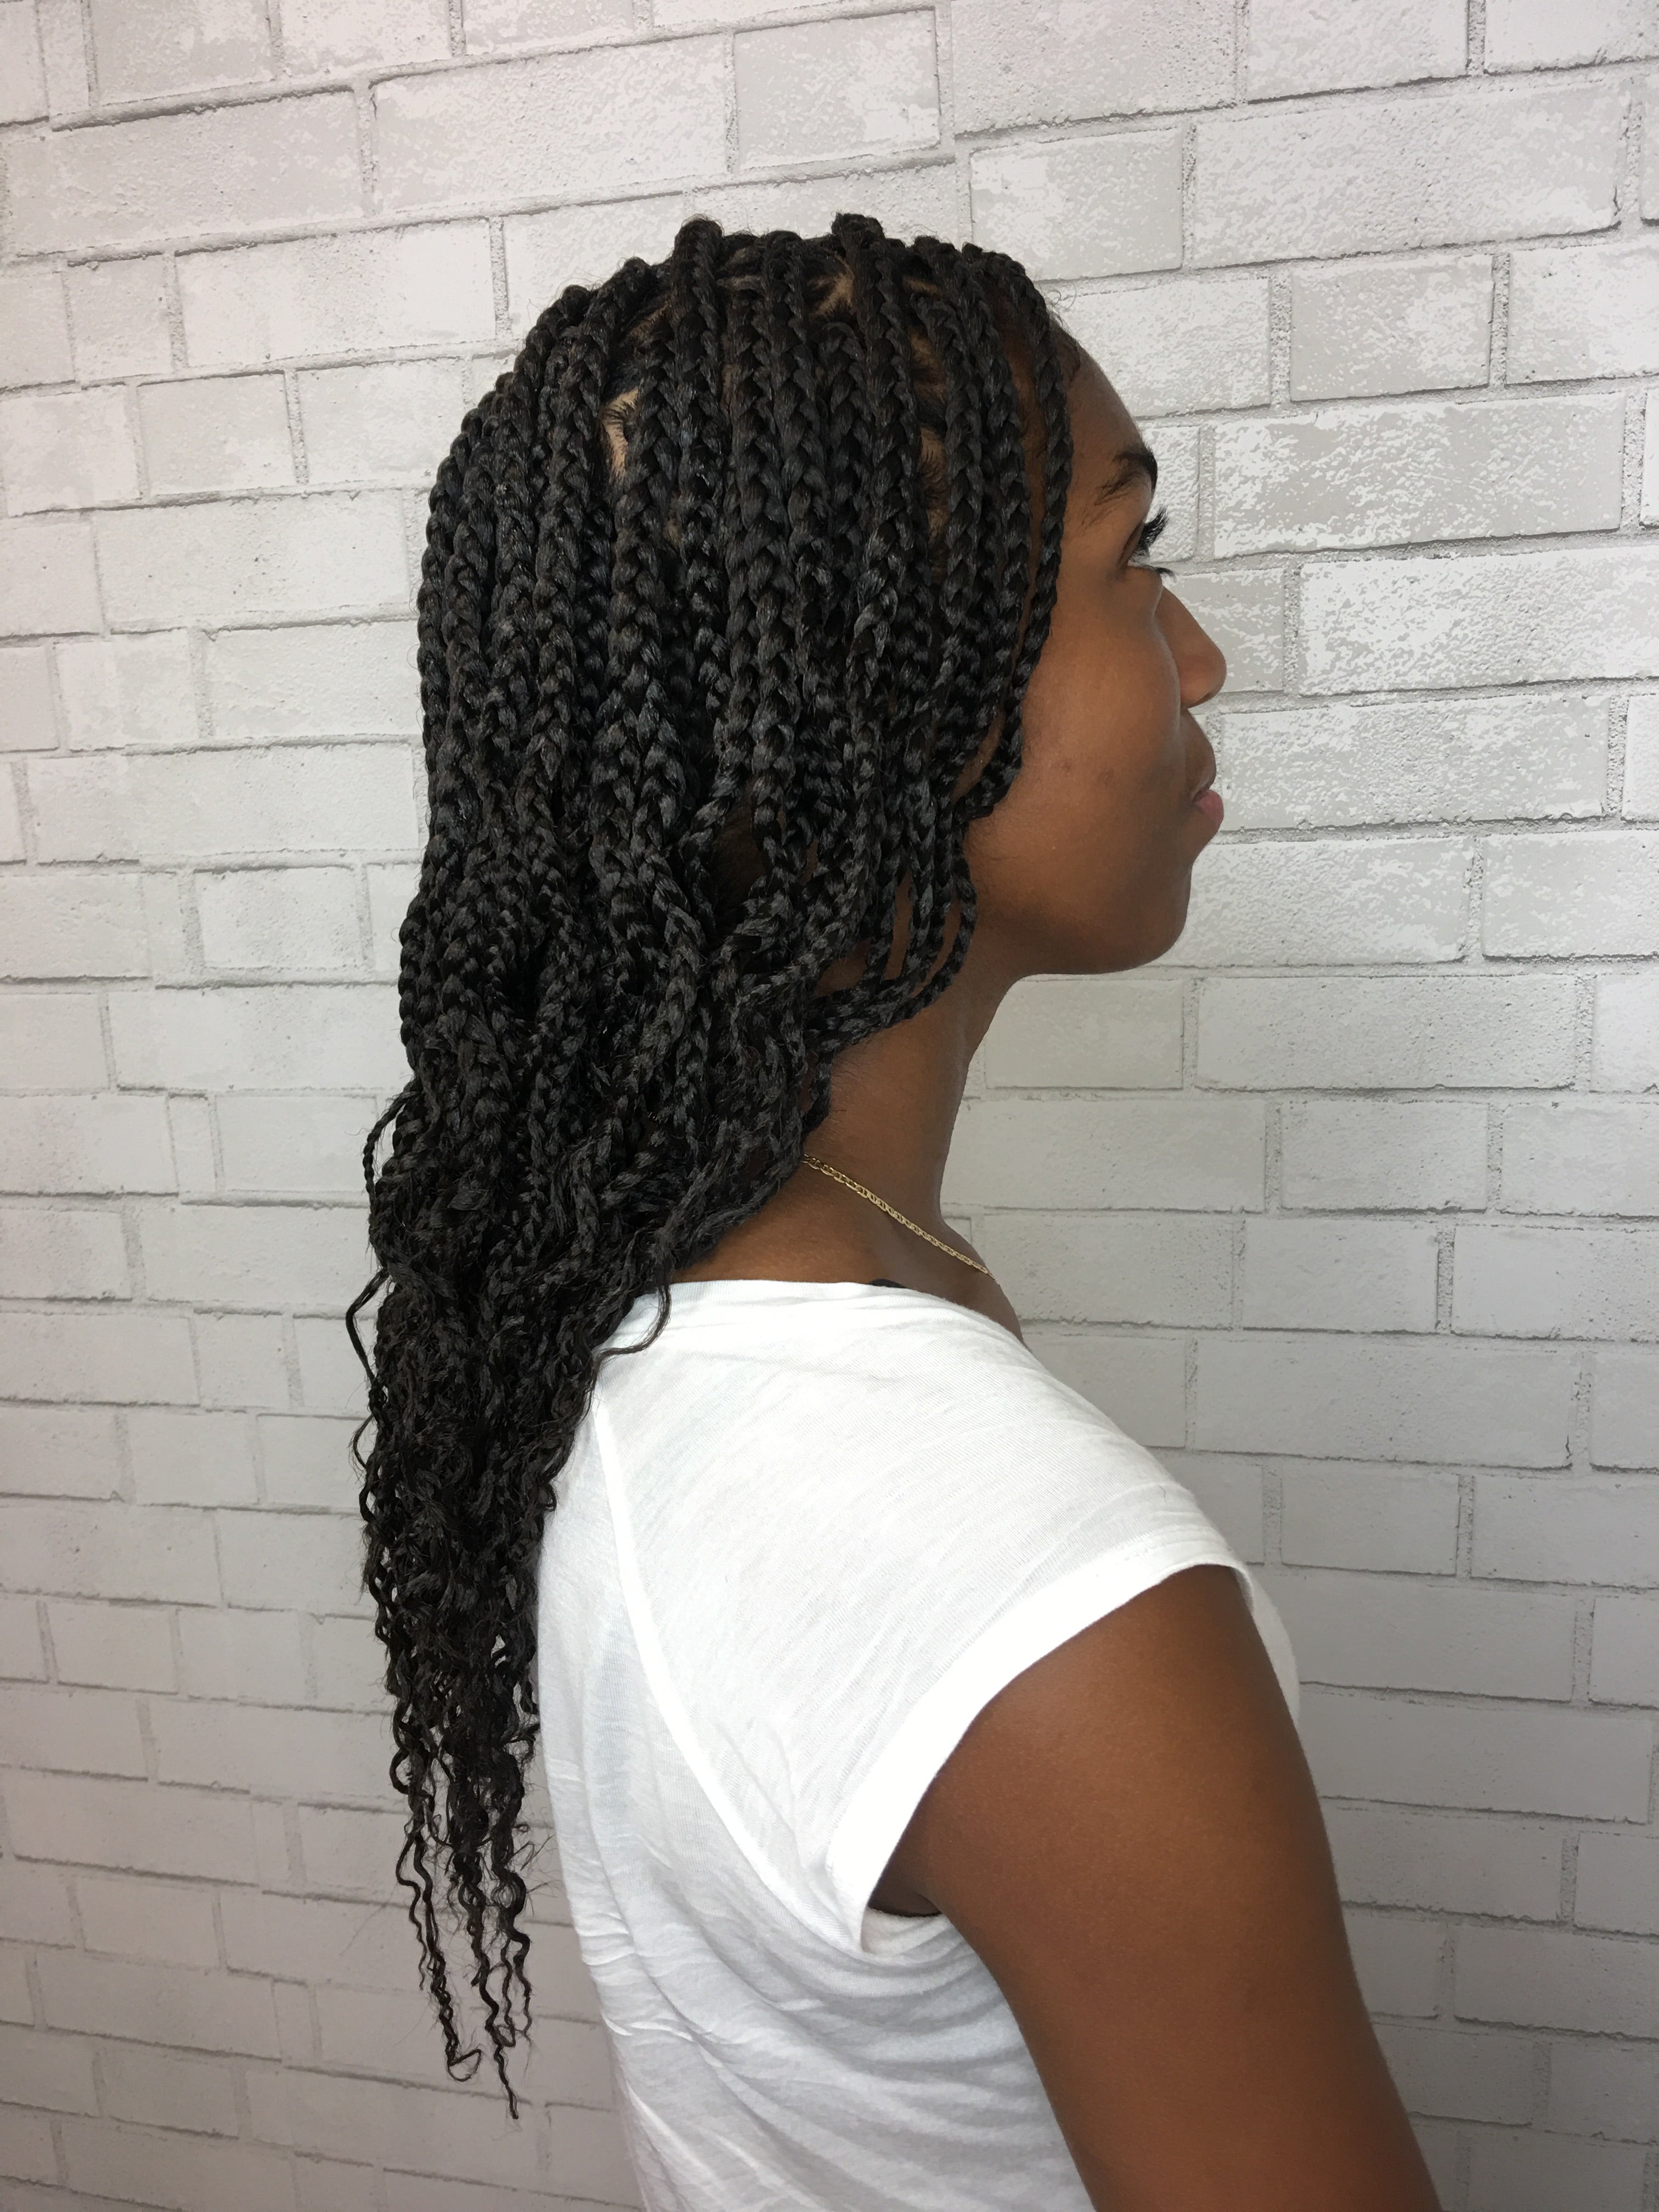 Mid-Back Length Medium Box Braids with curly ends 